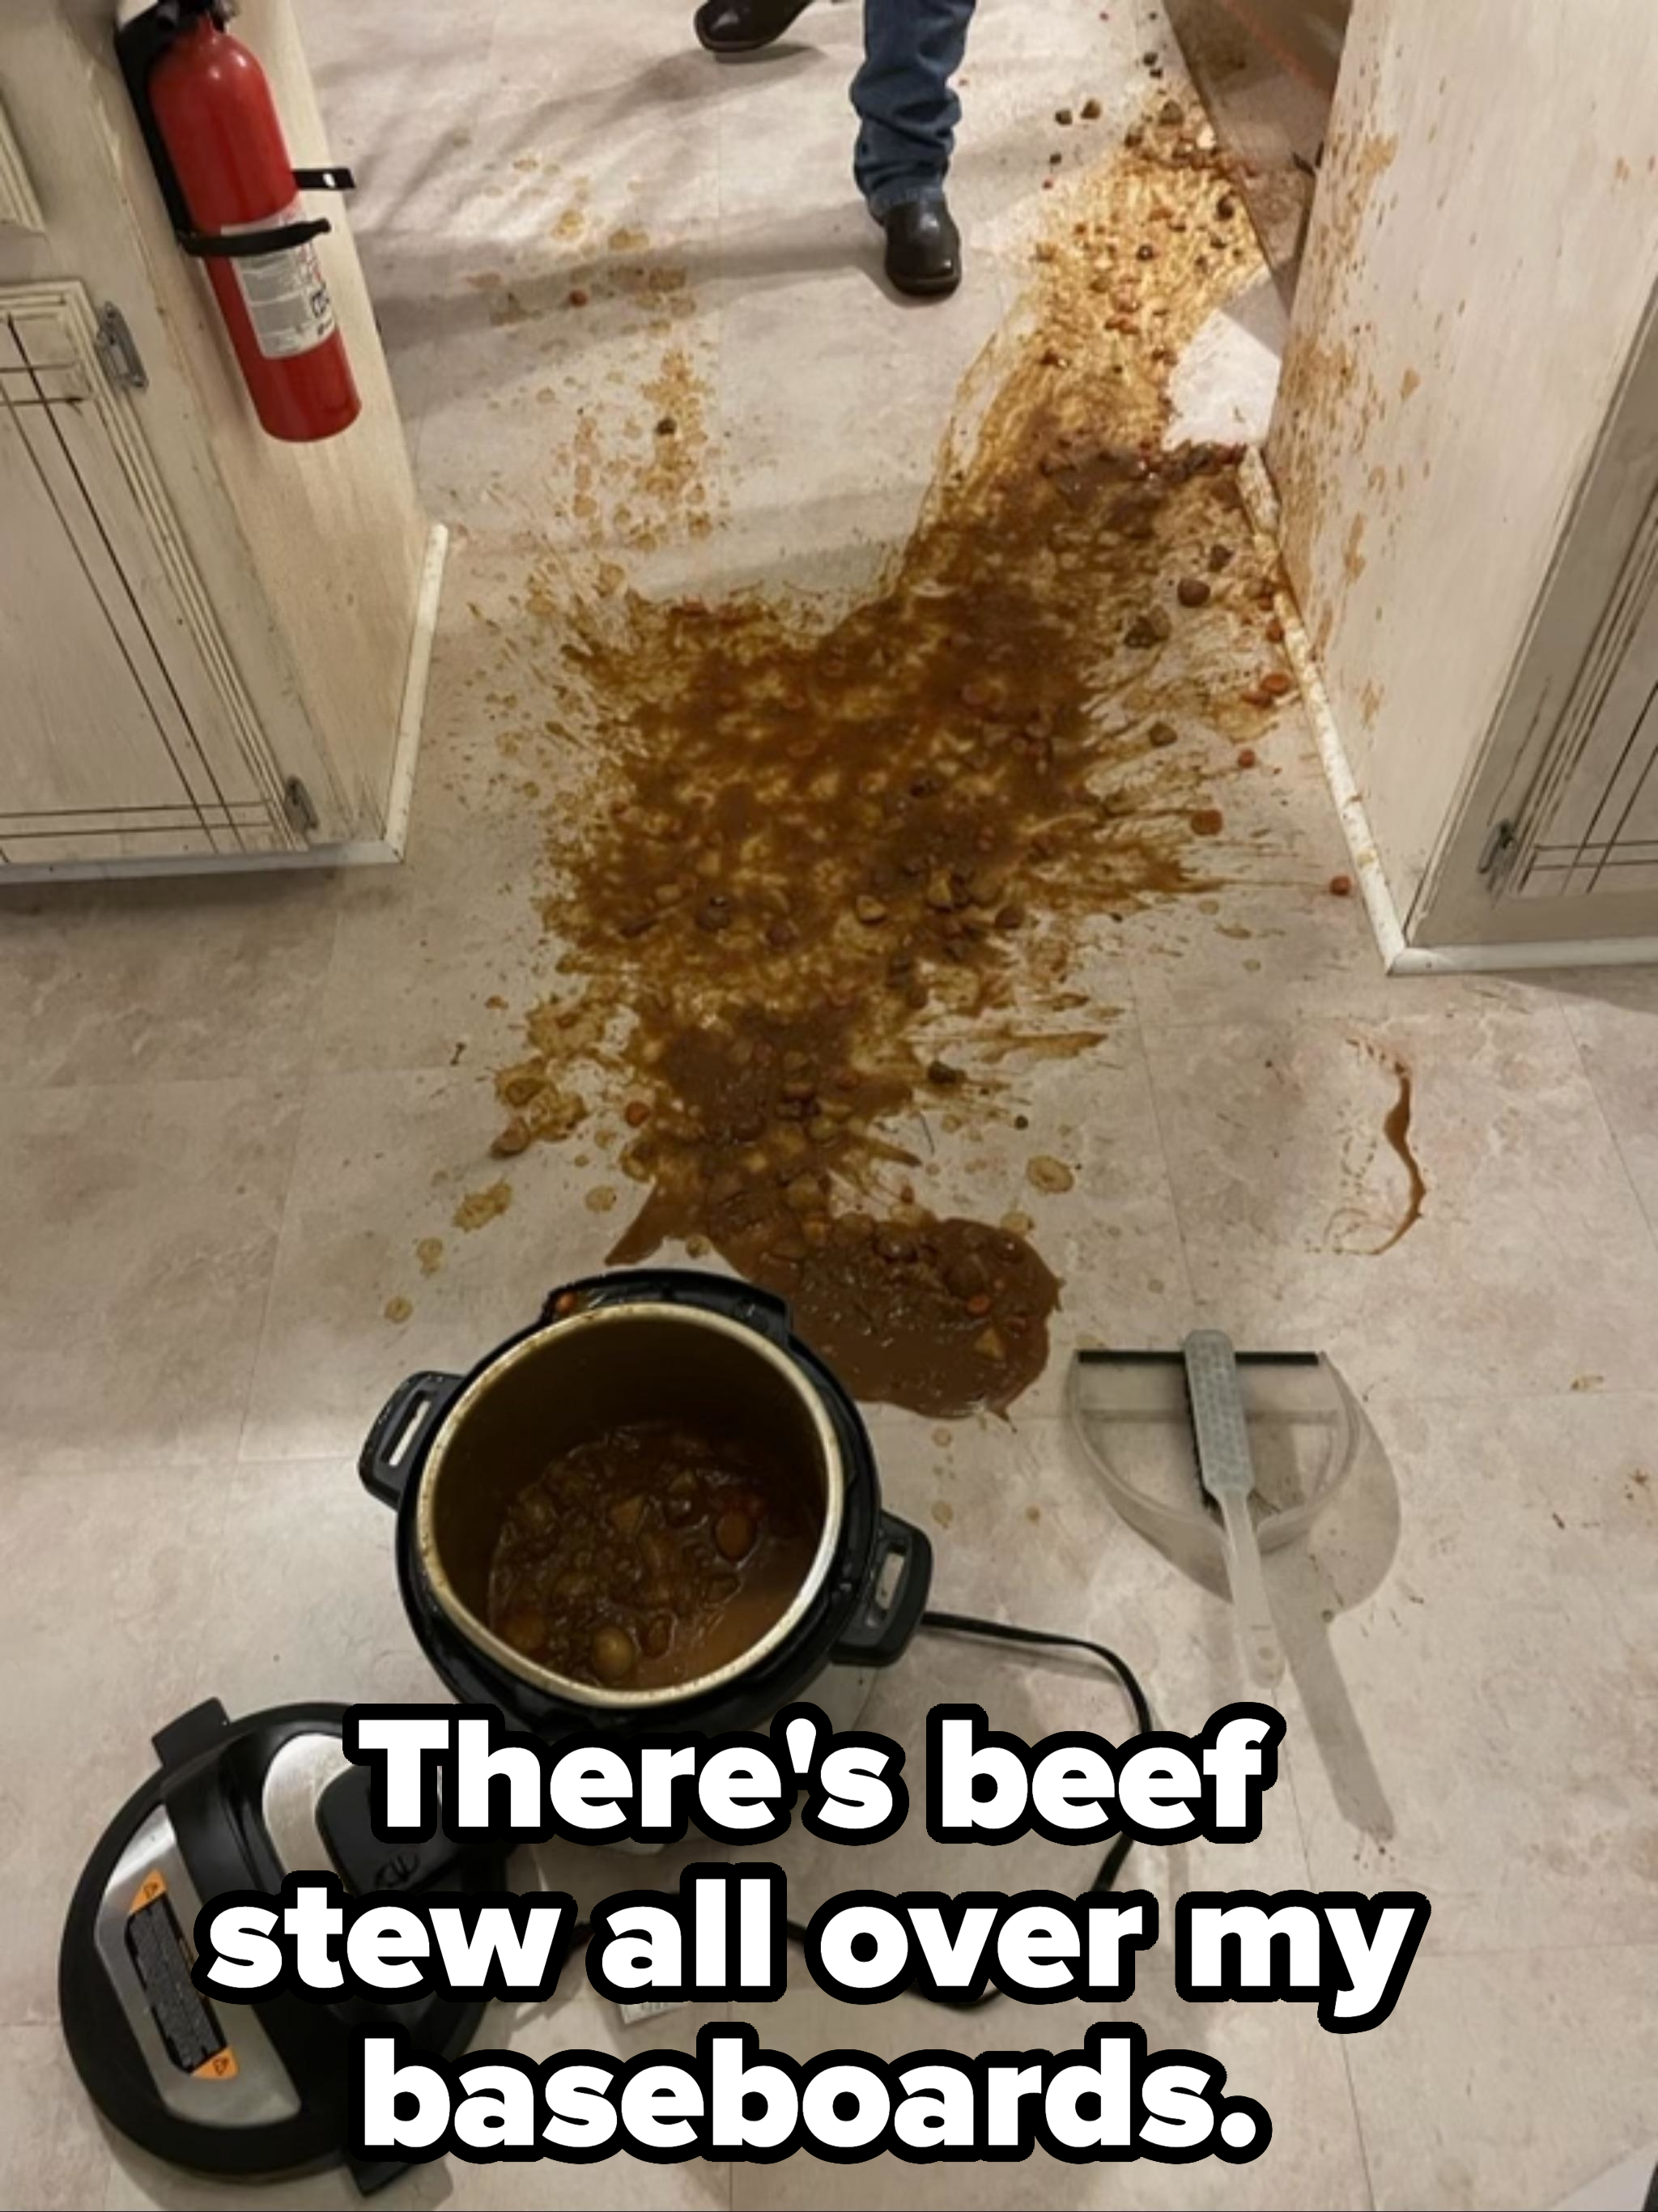 &quot;There&#x27;s beef stew all over my baseboards&quot;: A pot of stew is spilled all over the kitchen floor and lower walls